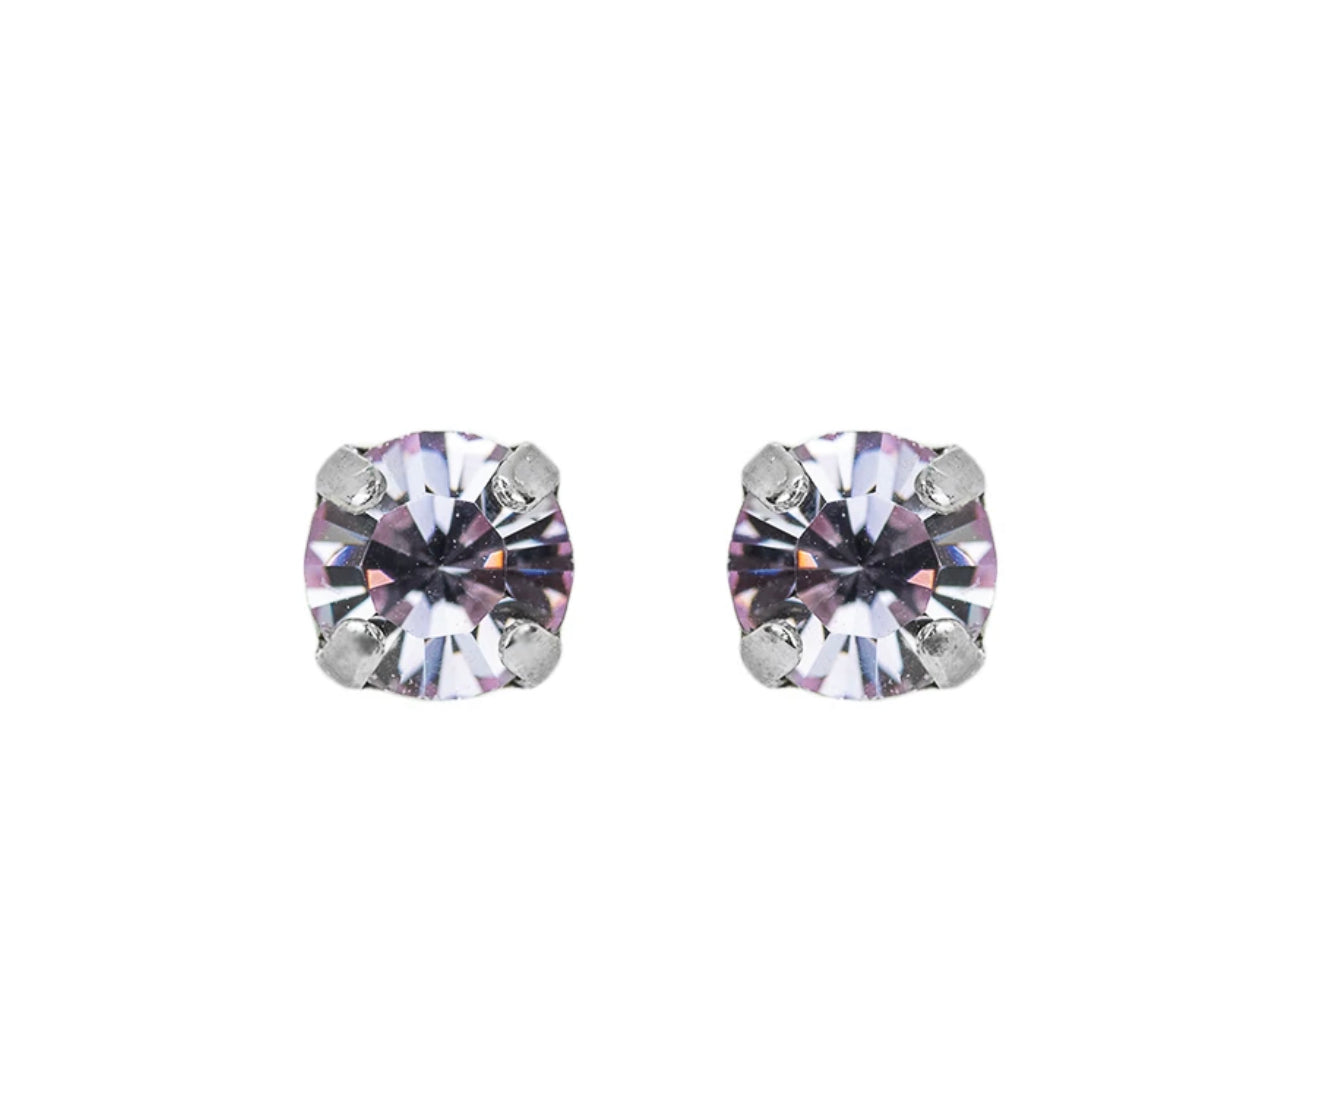 Mariana Antiqued Silver Must-Have Petite Crystal Post Earrings in "Violet”